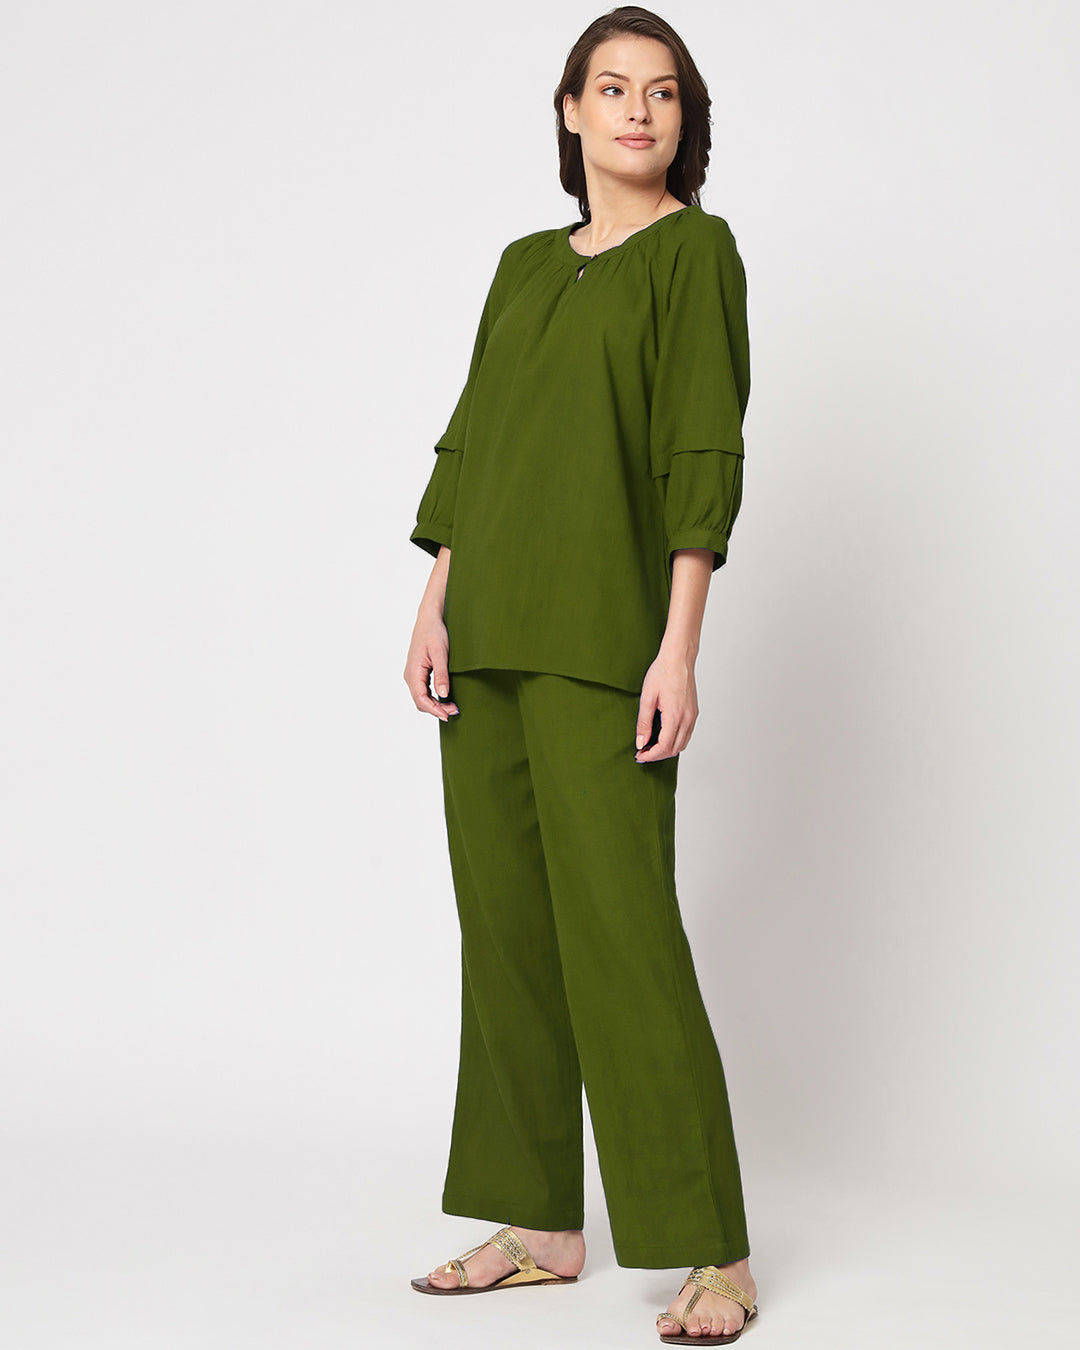 Greening Spring Button Neck Solid Top (Without Bottoms)